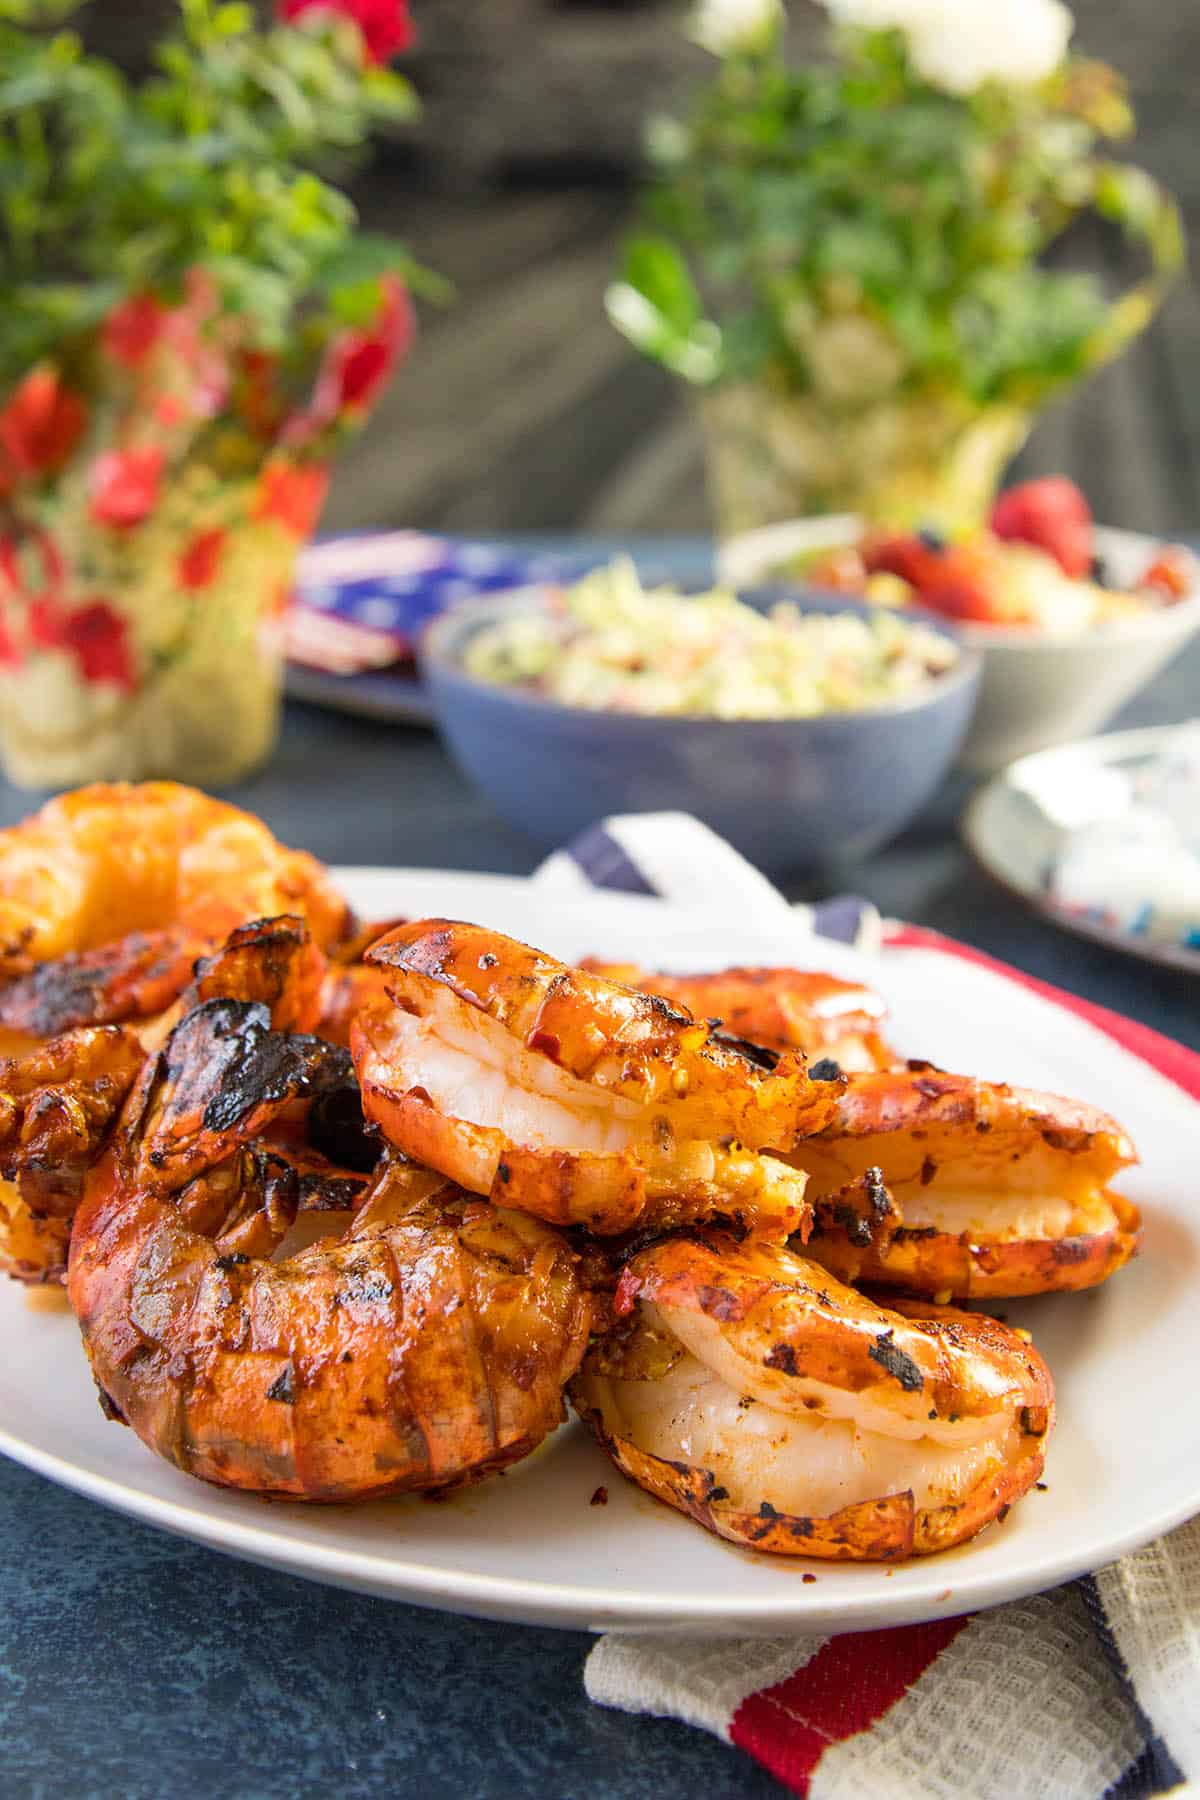 Colossal Grilled Shrimp - Plated anColossal Grilled Shrimp - Plated and Ready for Your Dinnerd Ready for Your Dinner